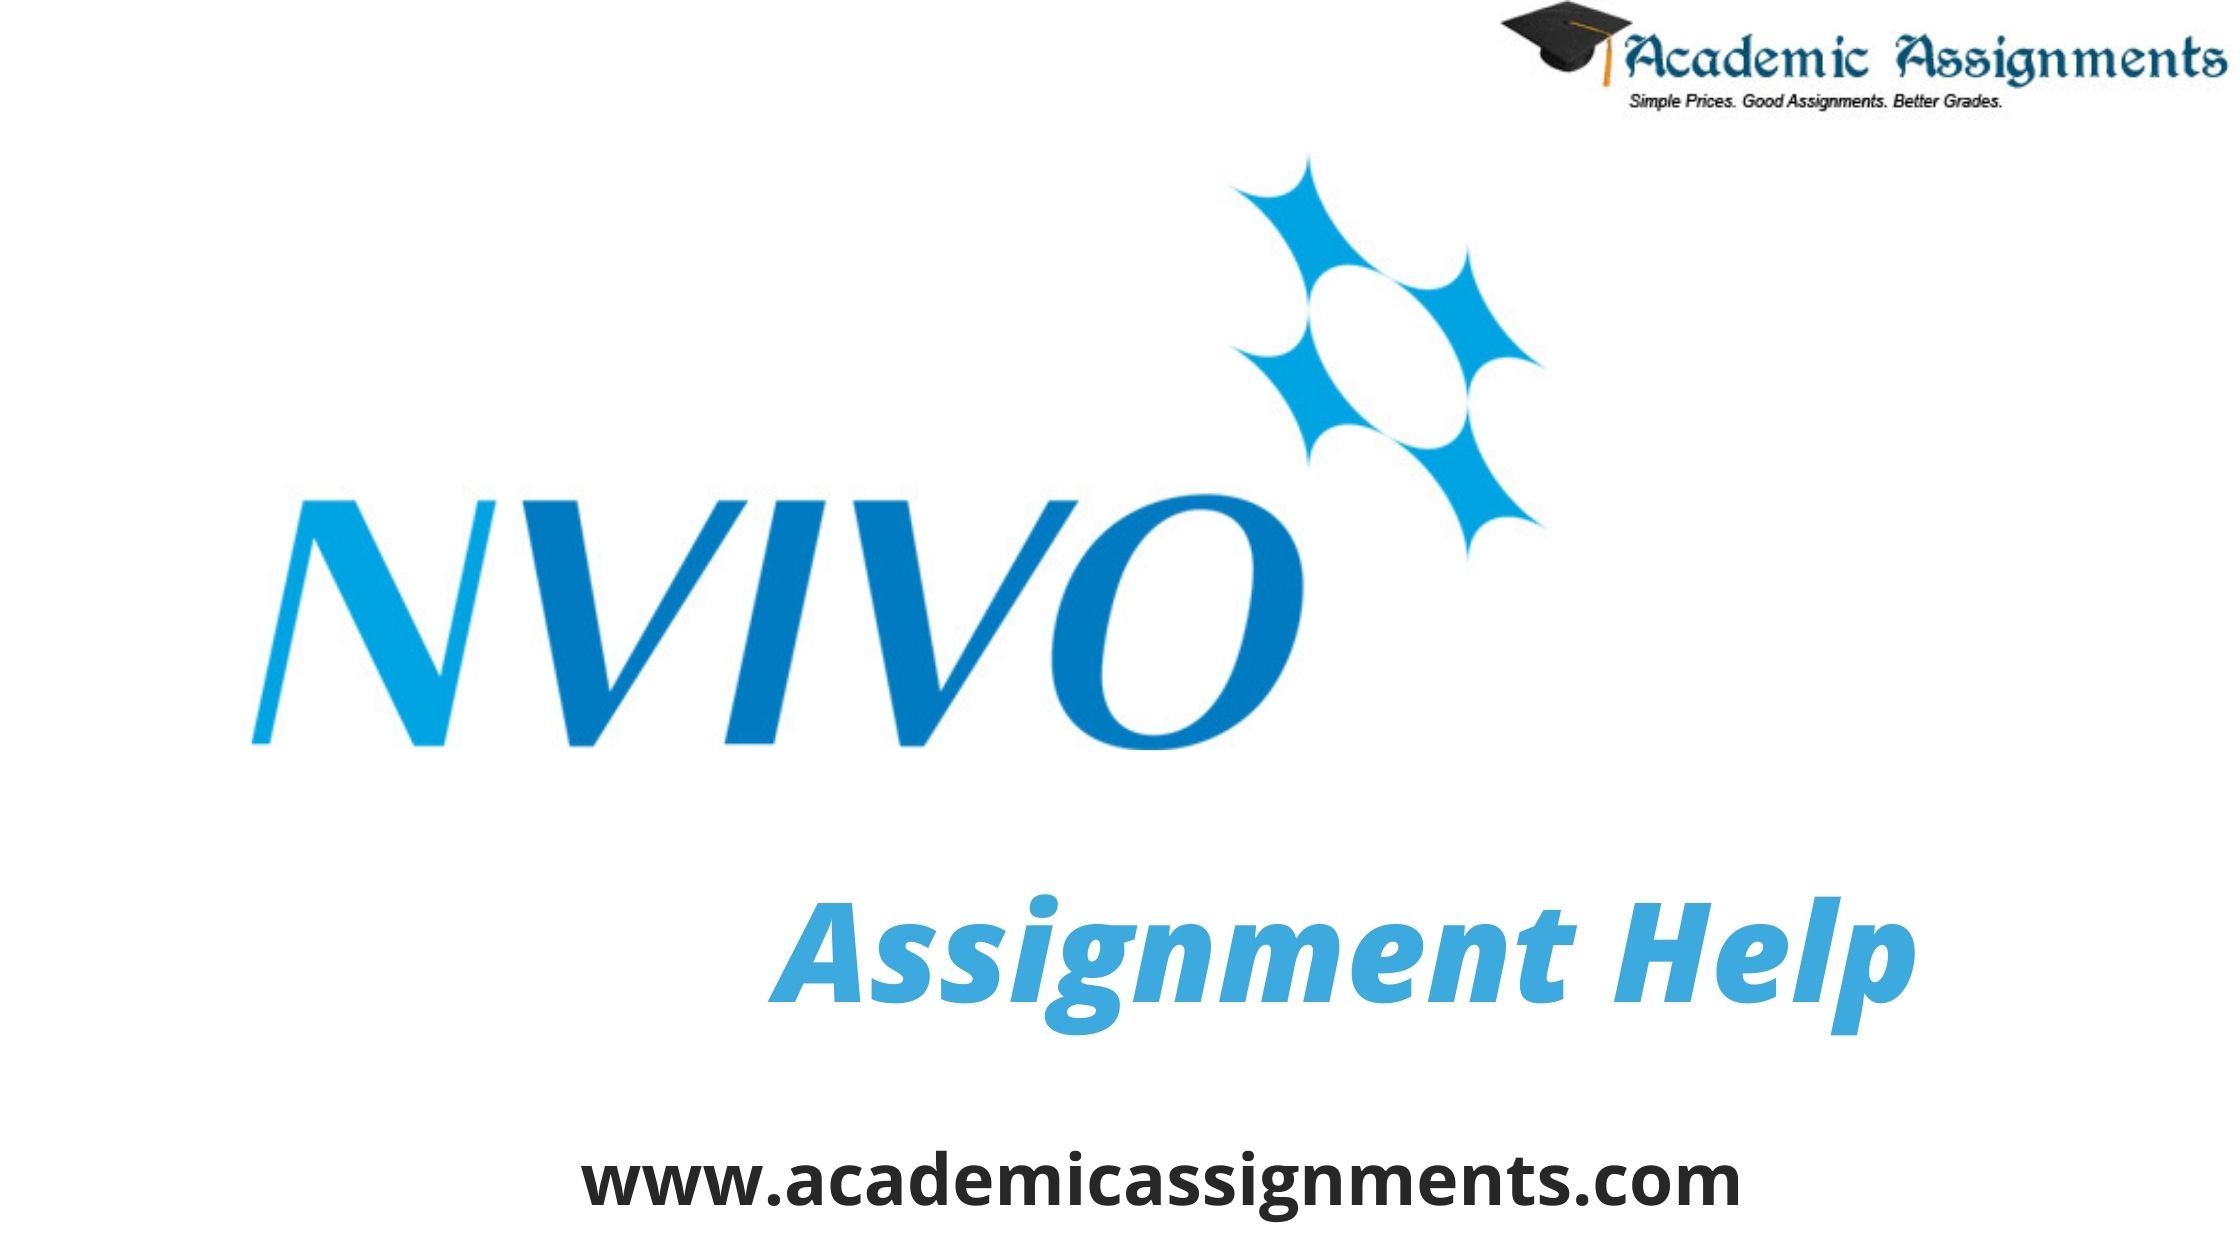 NVivo Assignment Help